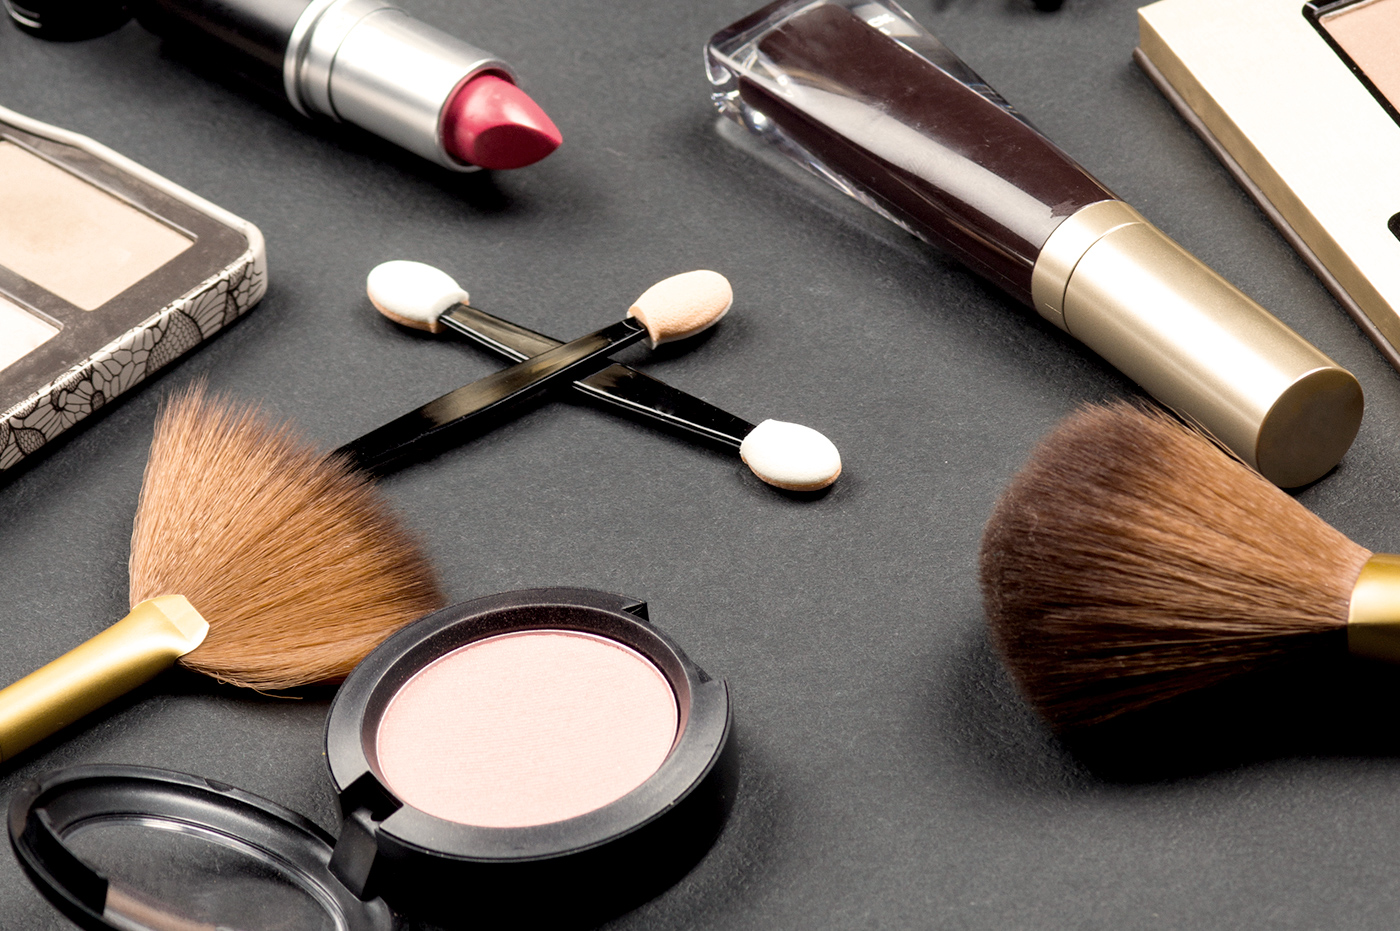 Various makeup tools and products.